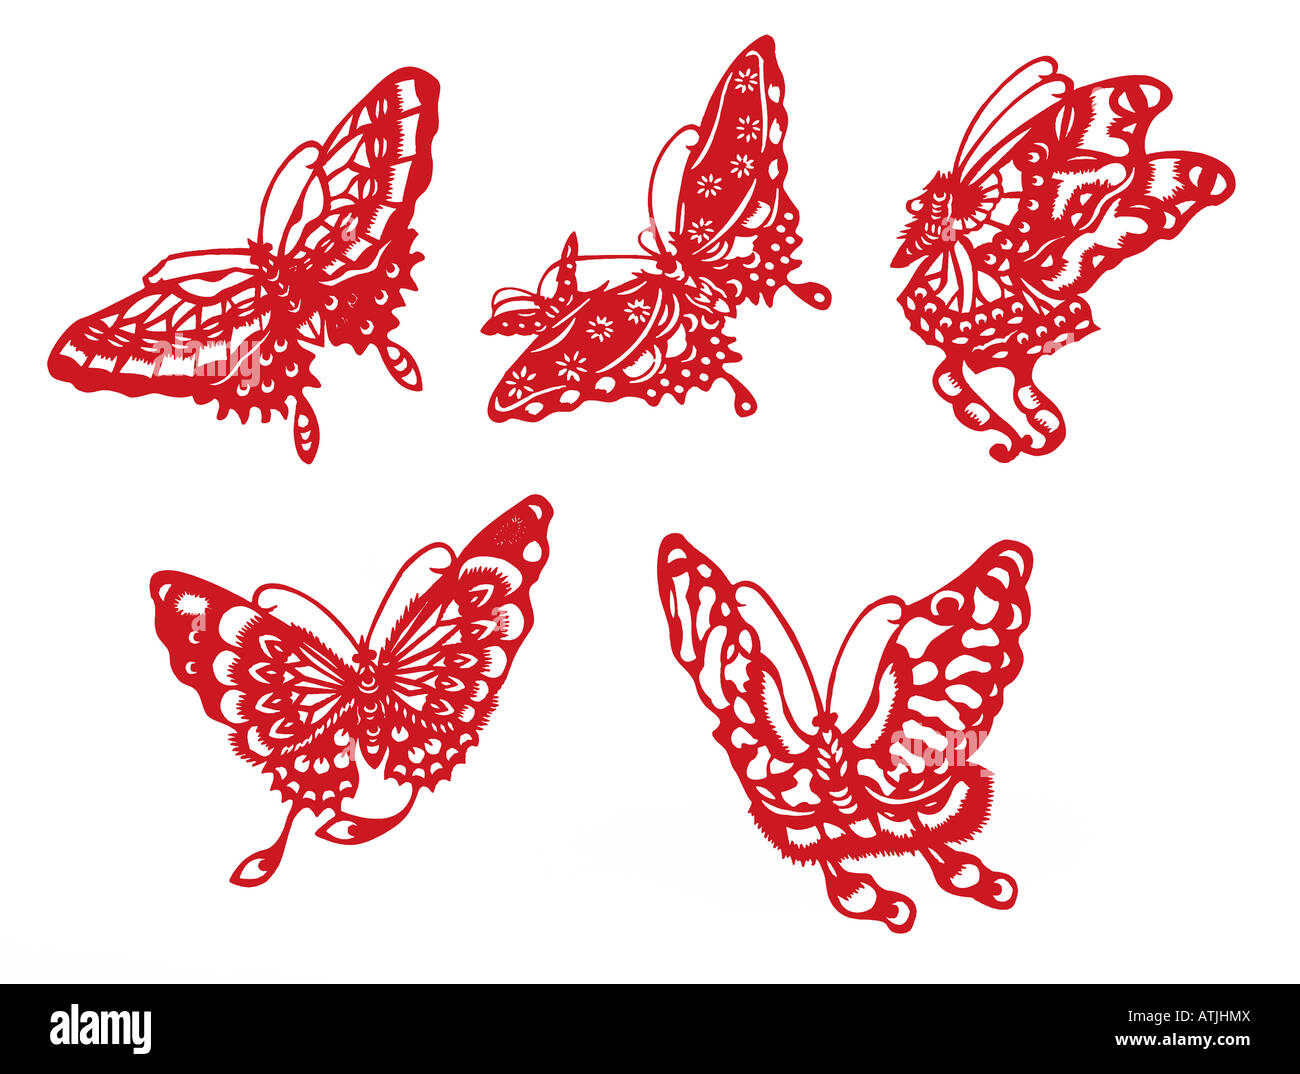 butterfly silhouette with clipping path Stock Photo